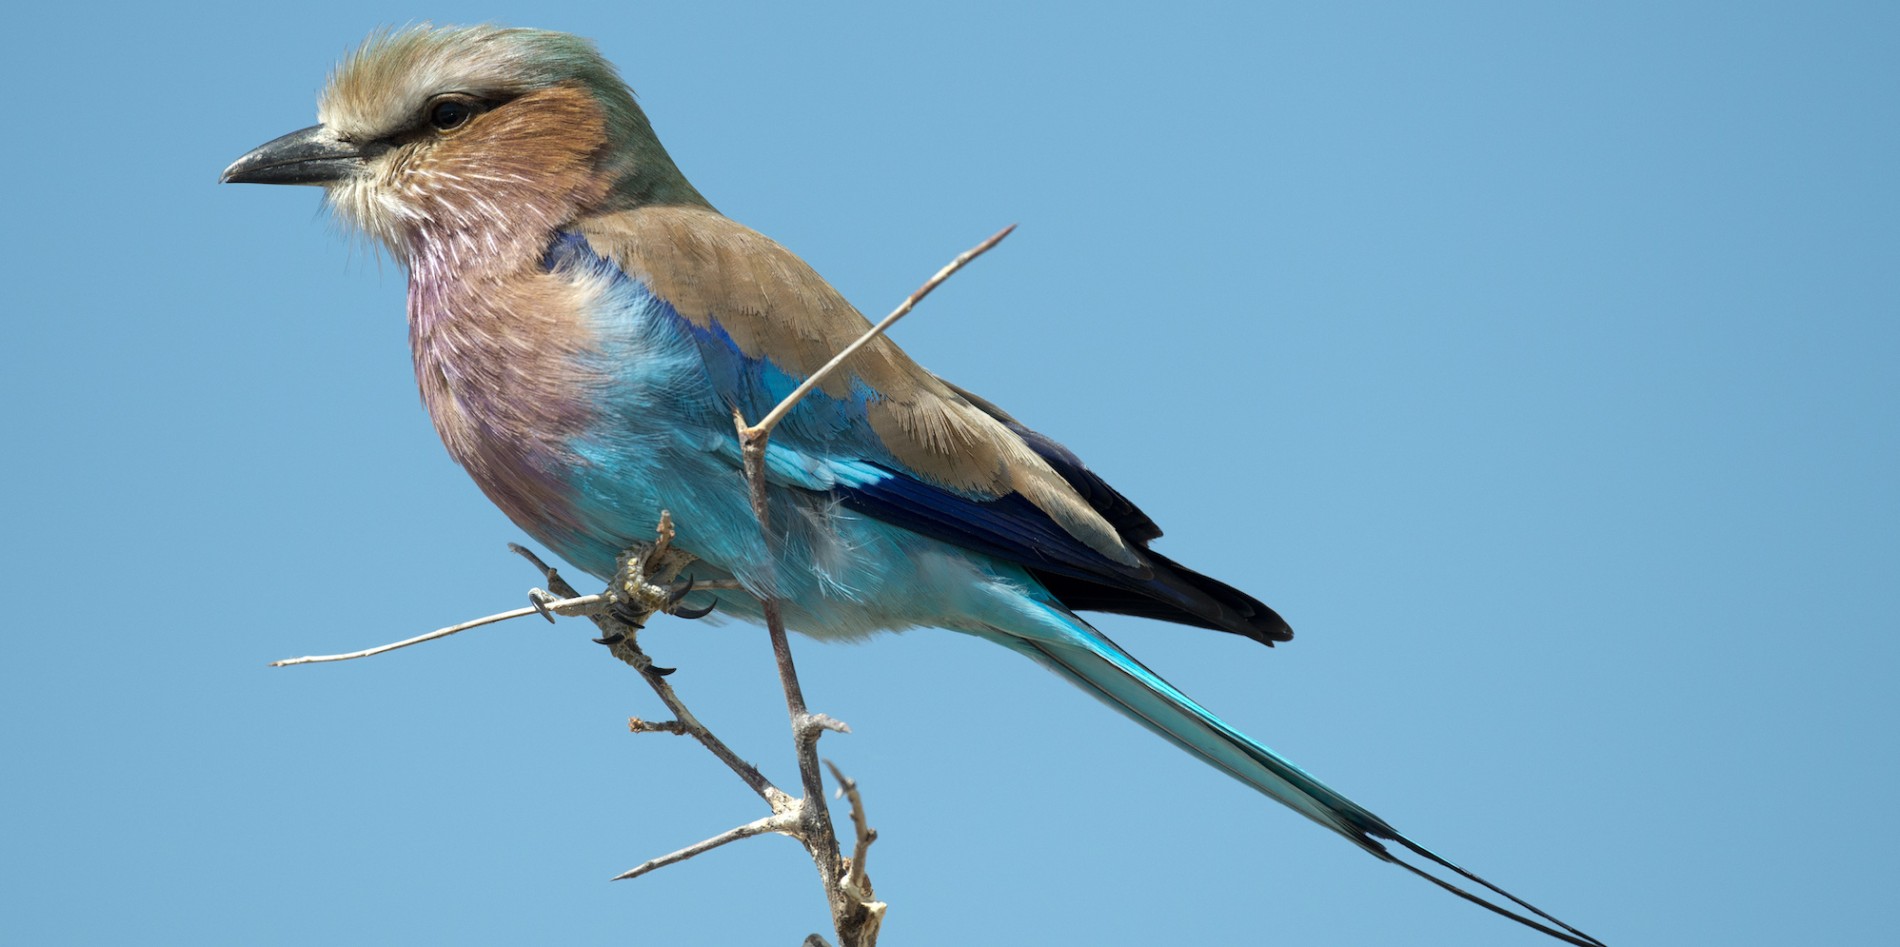 Lilac-breasted roller bird perched in a tree with blue sky behind it